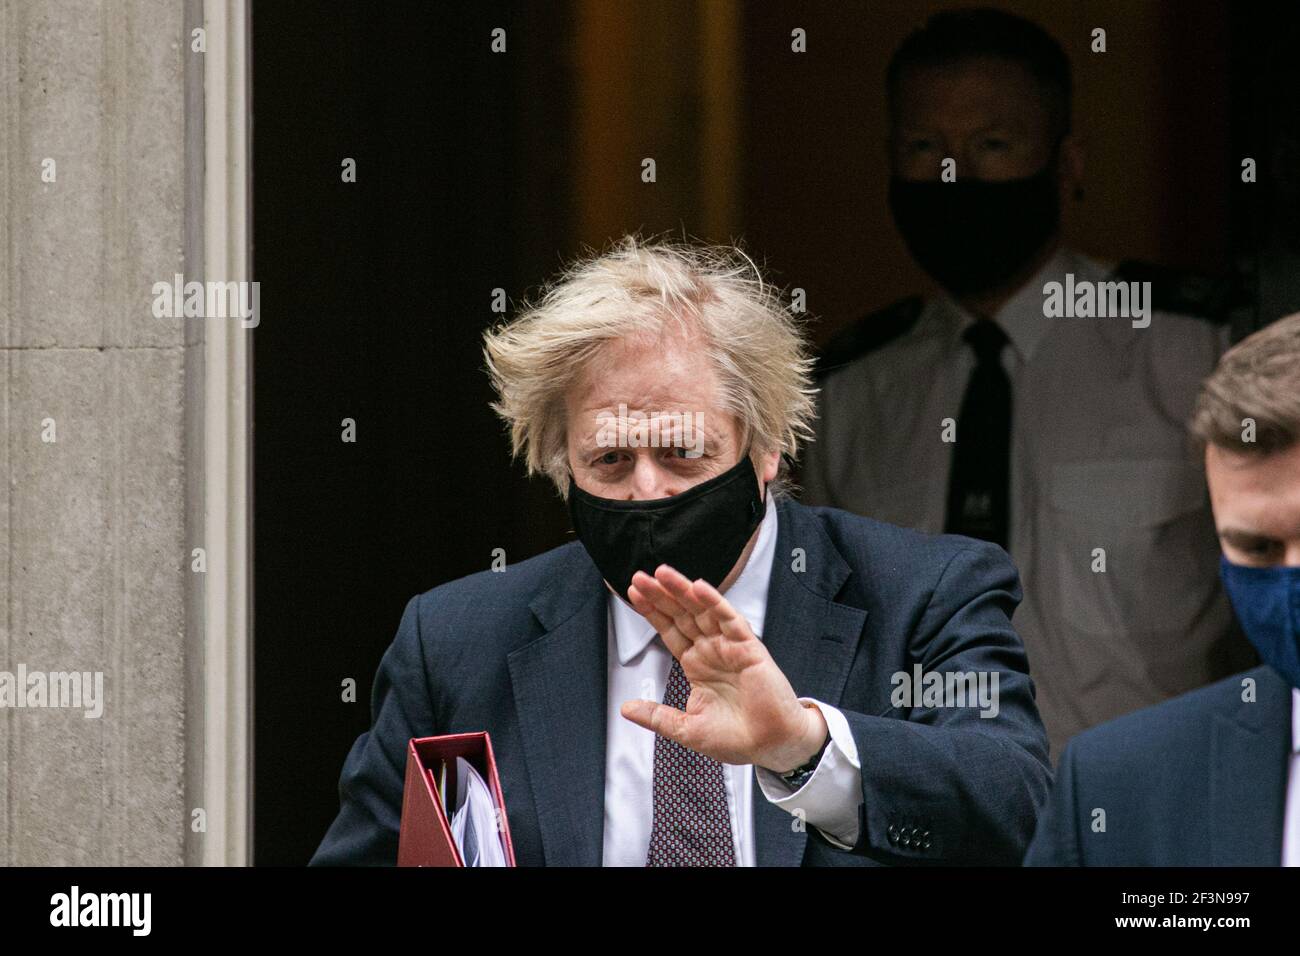 WESTMINSTER  LONDON, UK 17 March 2021. Prime Minister Boris Johnson departs from 10 Downing Street for Parliament to attend the weekly PMQs Prime Minister Questions as his government plans to introduce new powers to crack down on protests.  MPs have voted to pass the  Police, Crime, Sentencing and Courts Bill at  the second reading after two days of debate in the House of Commons. Credit amer ghazzal/Alamy Live News Stock Photo